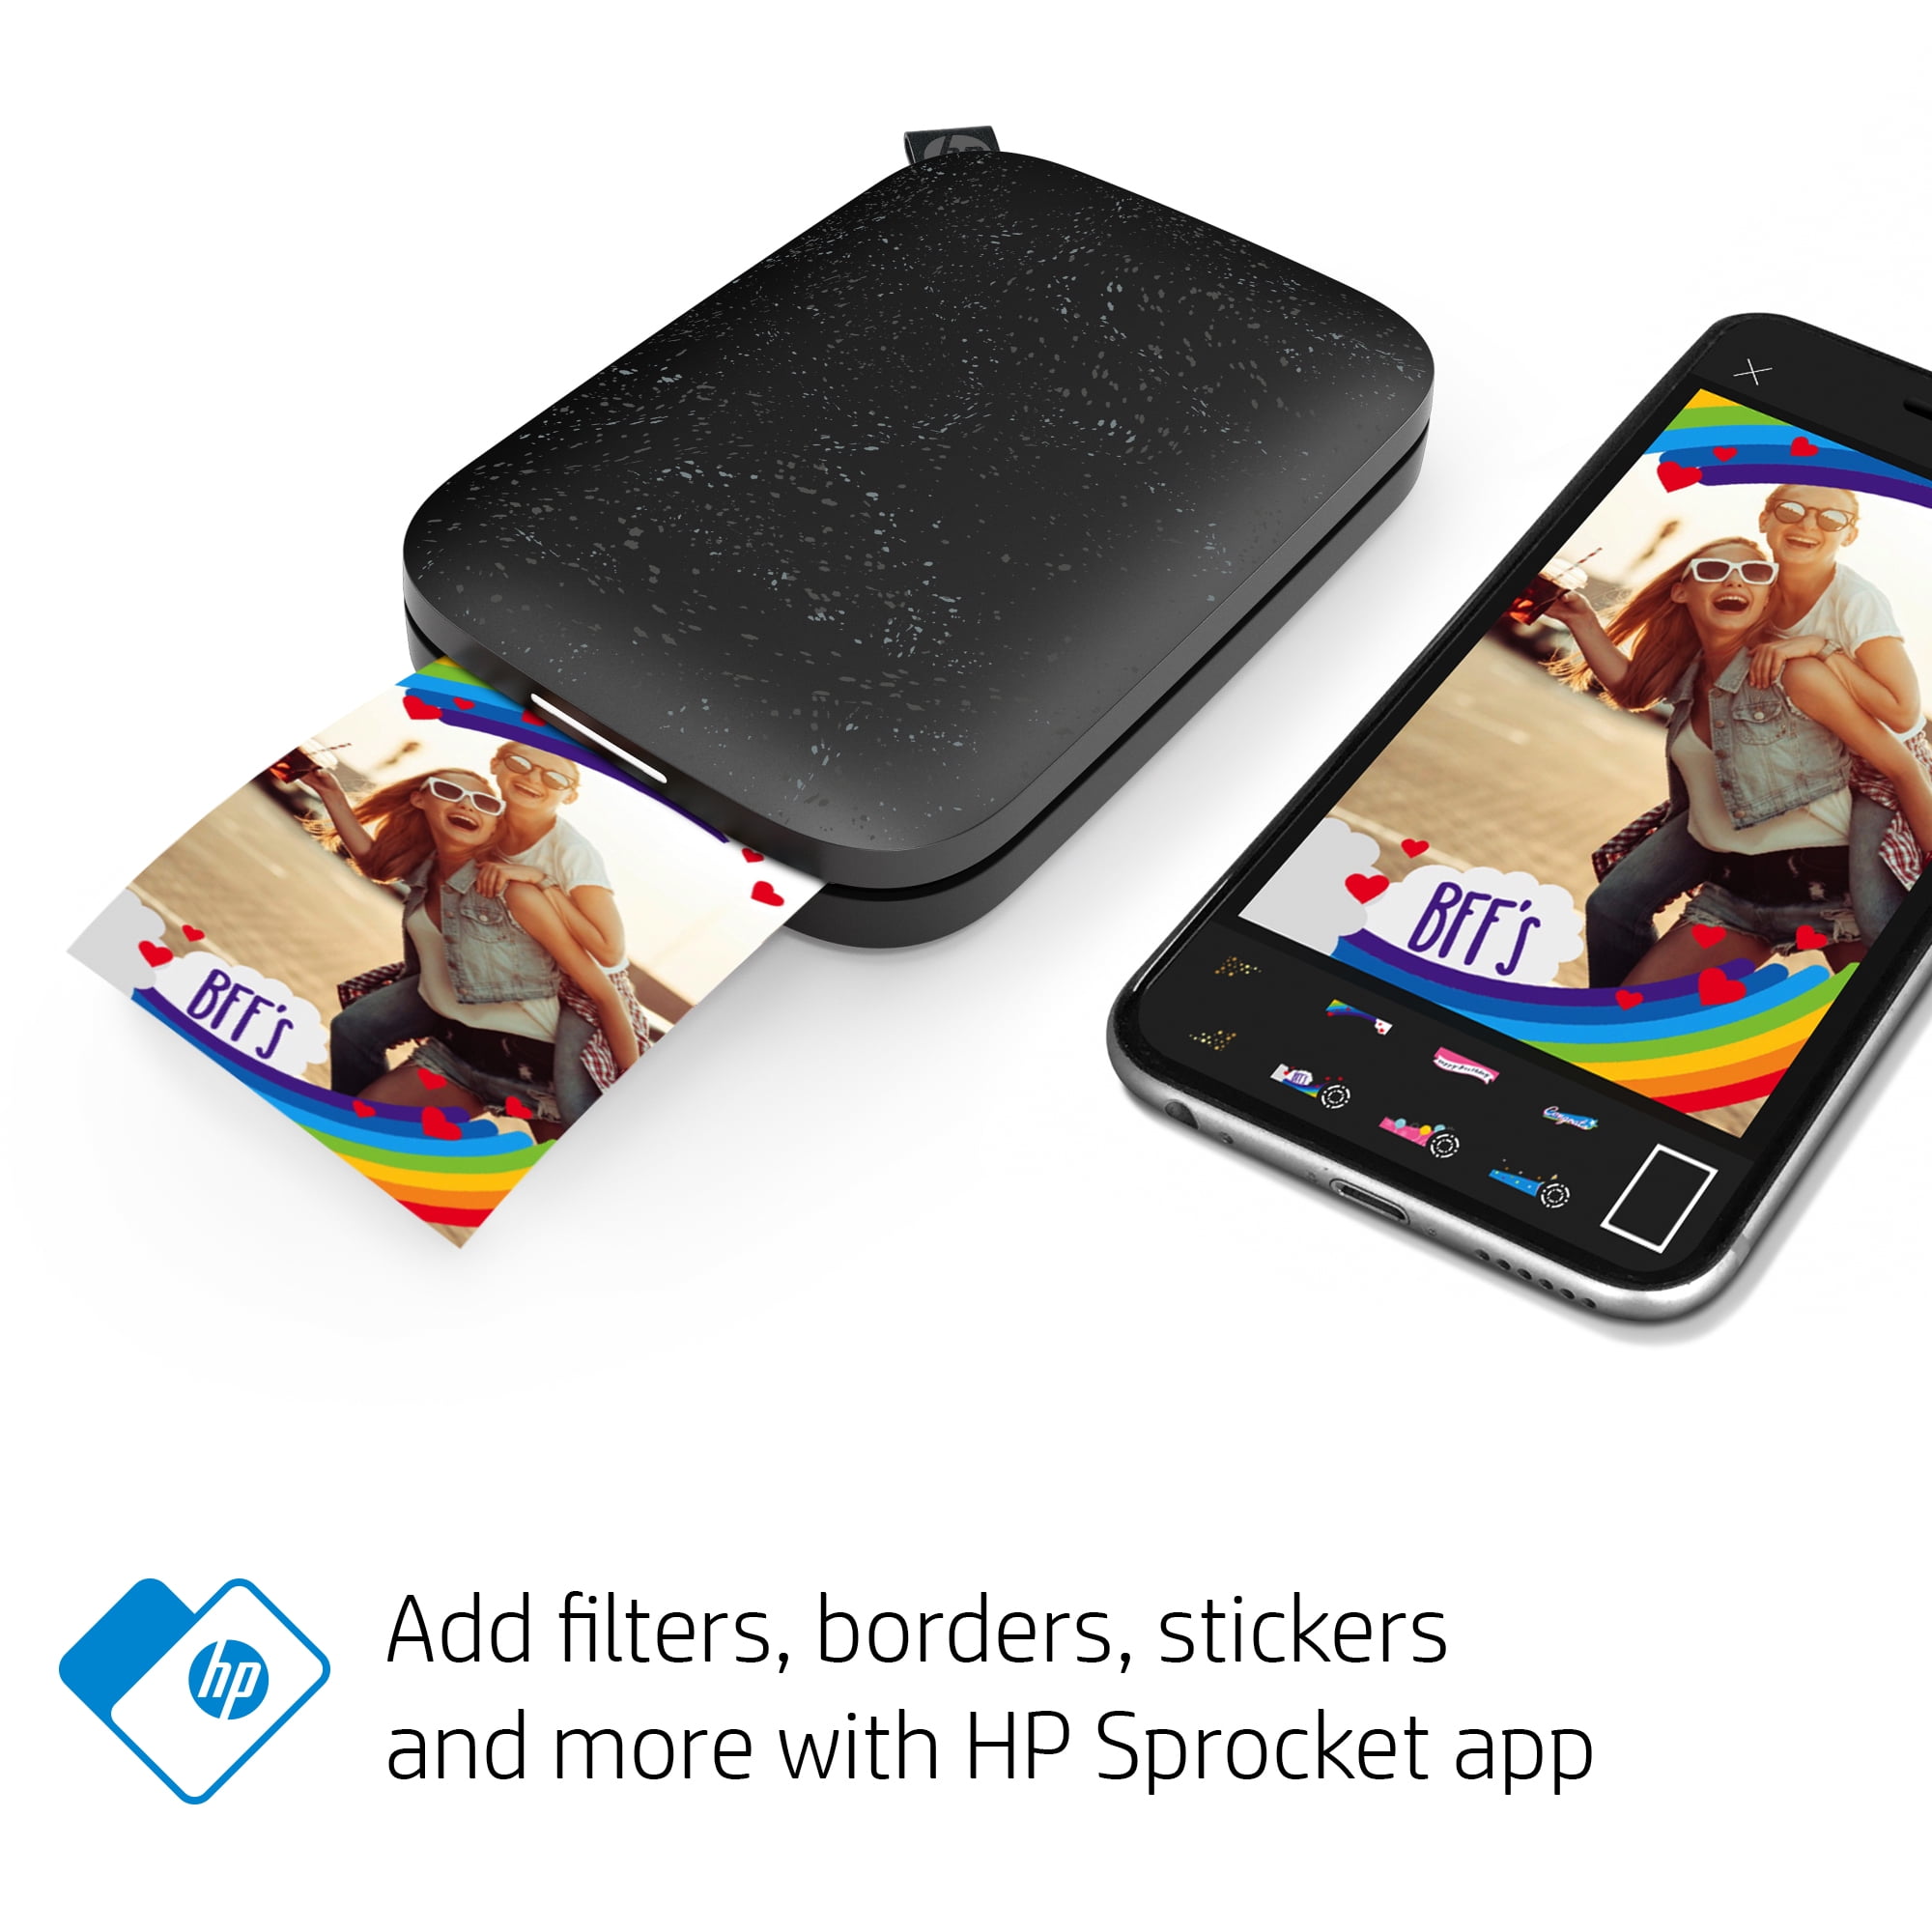 HP Sprocket Portable Photo Printer (Noir) – Print 2x3” Sticky-backed Photos from Your Phone - Walmart.com